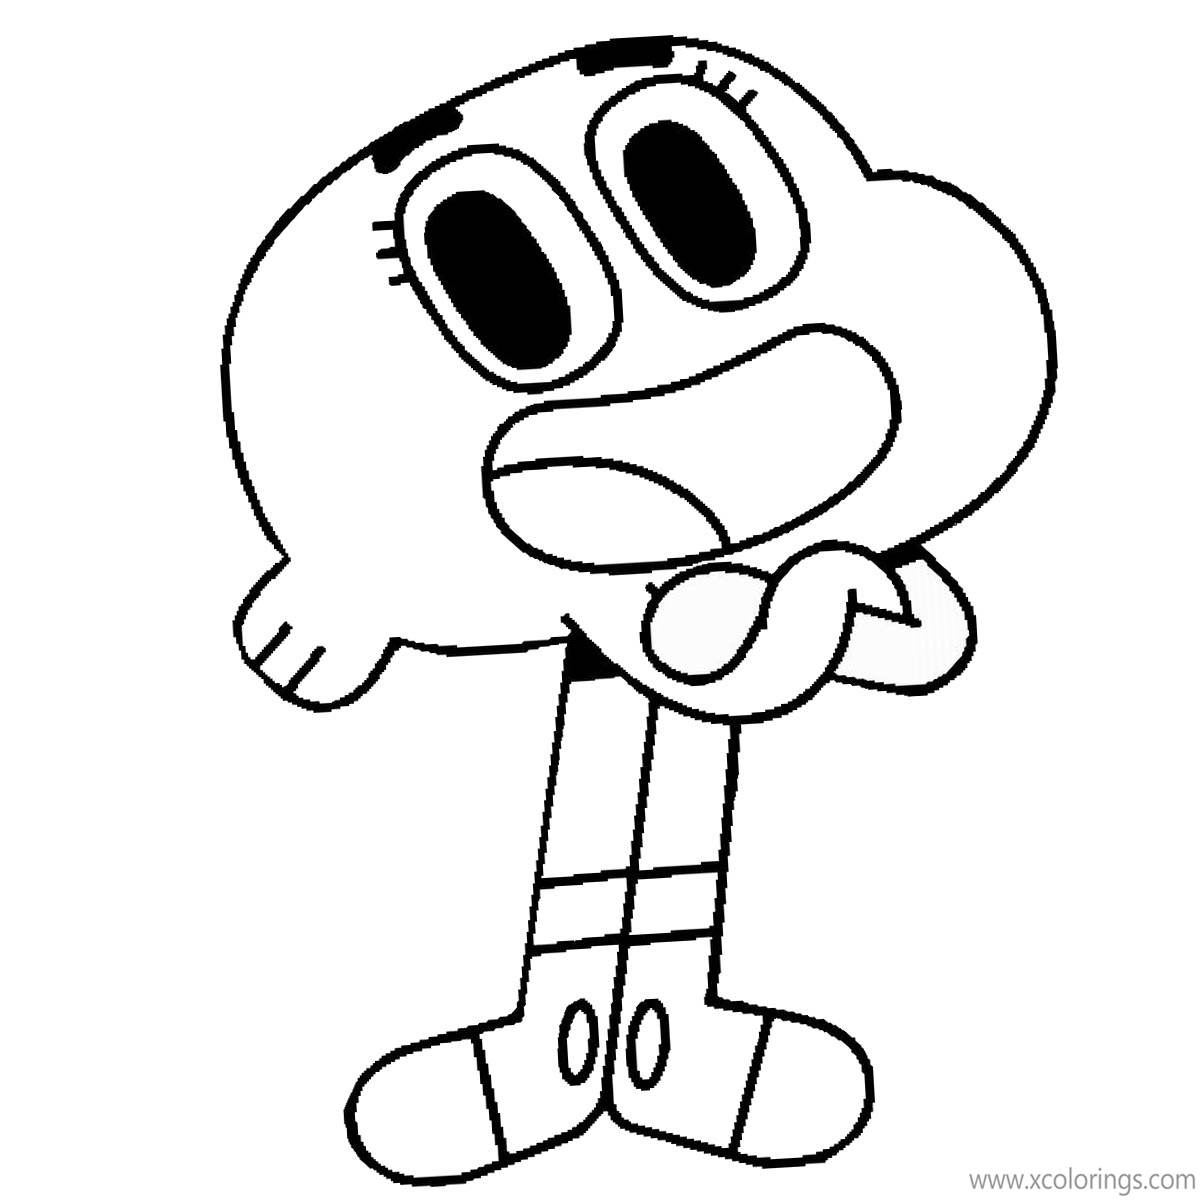 Free The Amazing World of Gumball Coloring Pages Darwin printable